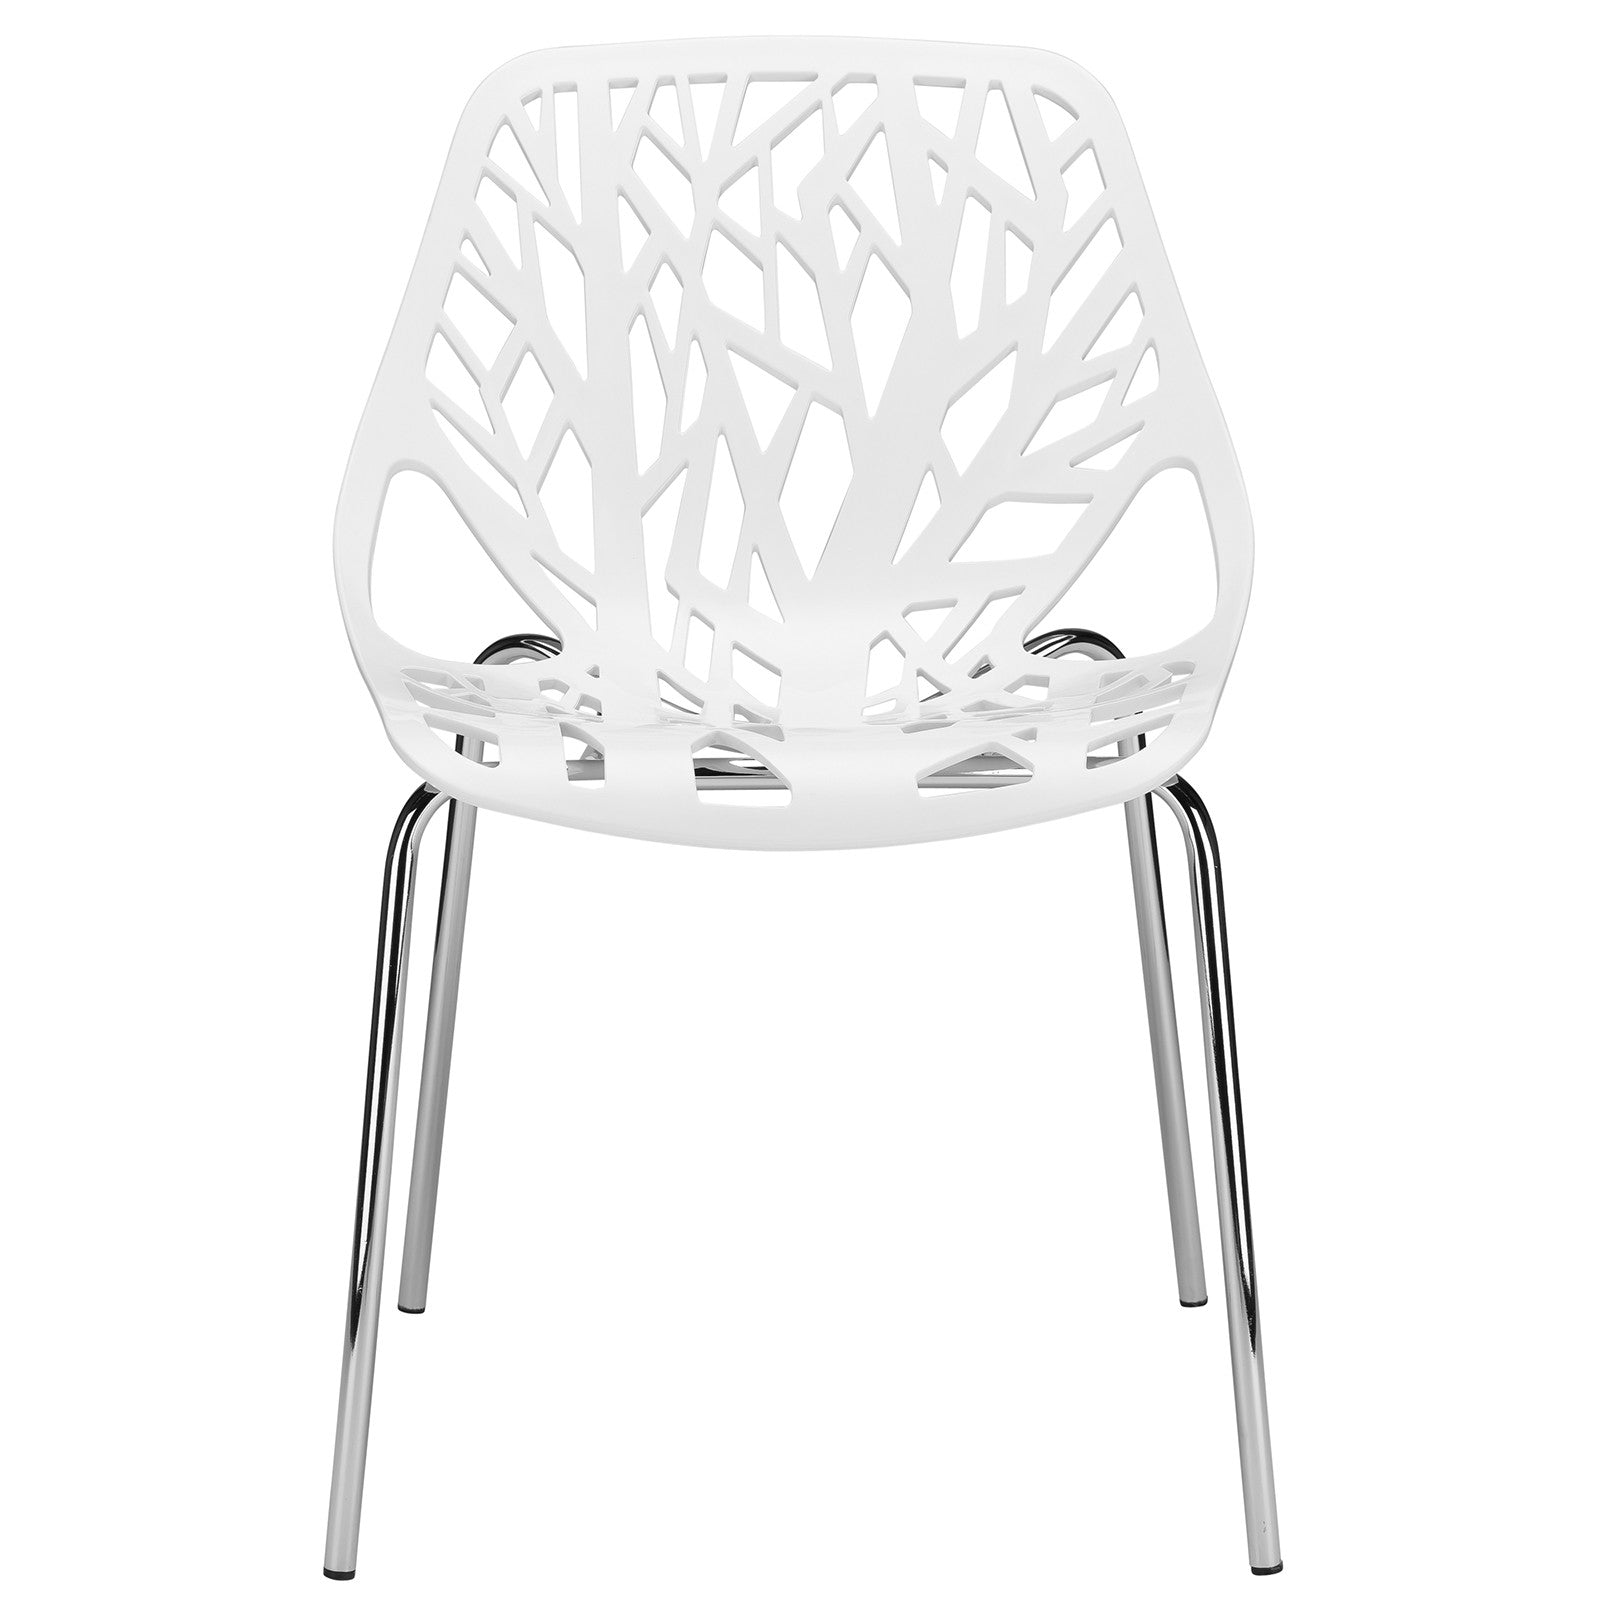 Lanna Furniture Colonia Dining Side Chair (Set of 2)-Minimal & Modern